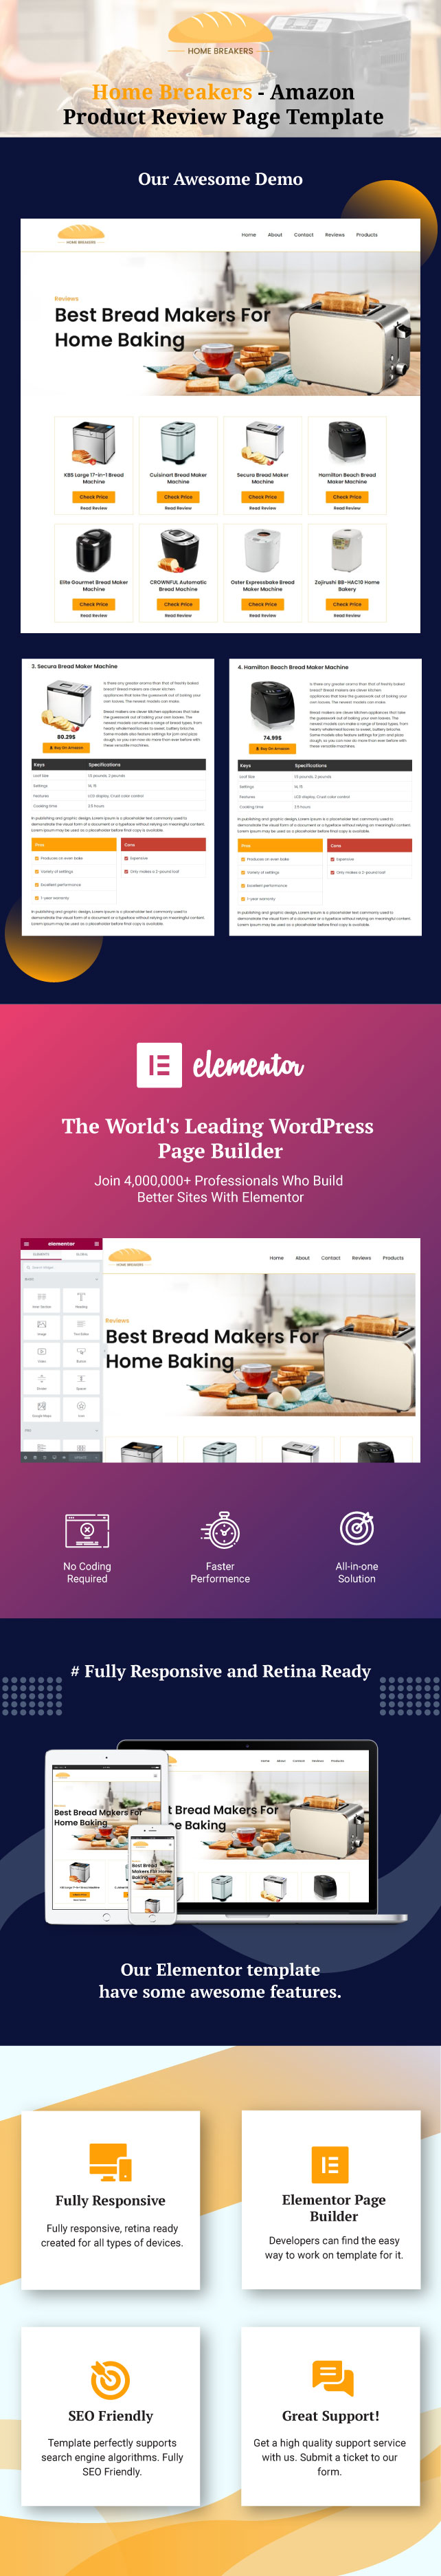 home-bakers-amazon-product-review-page-template